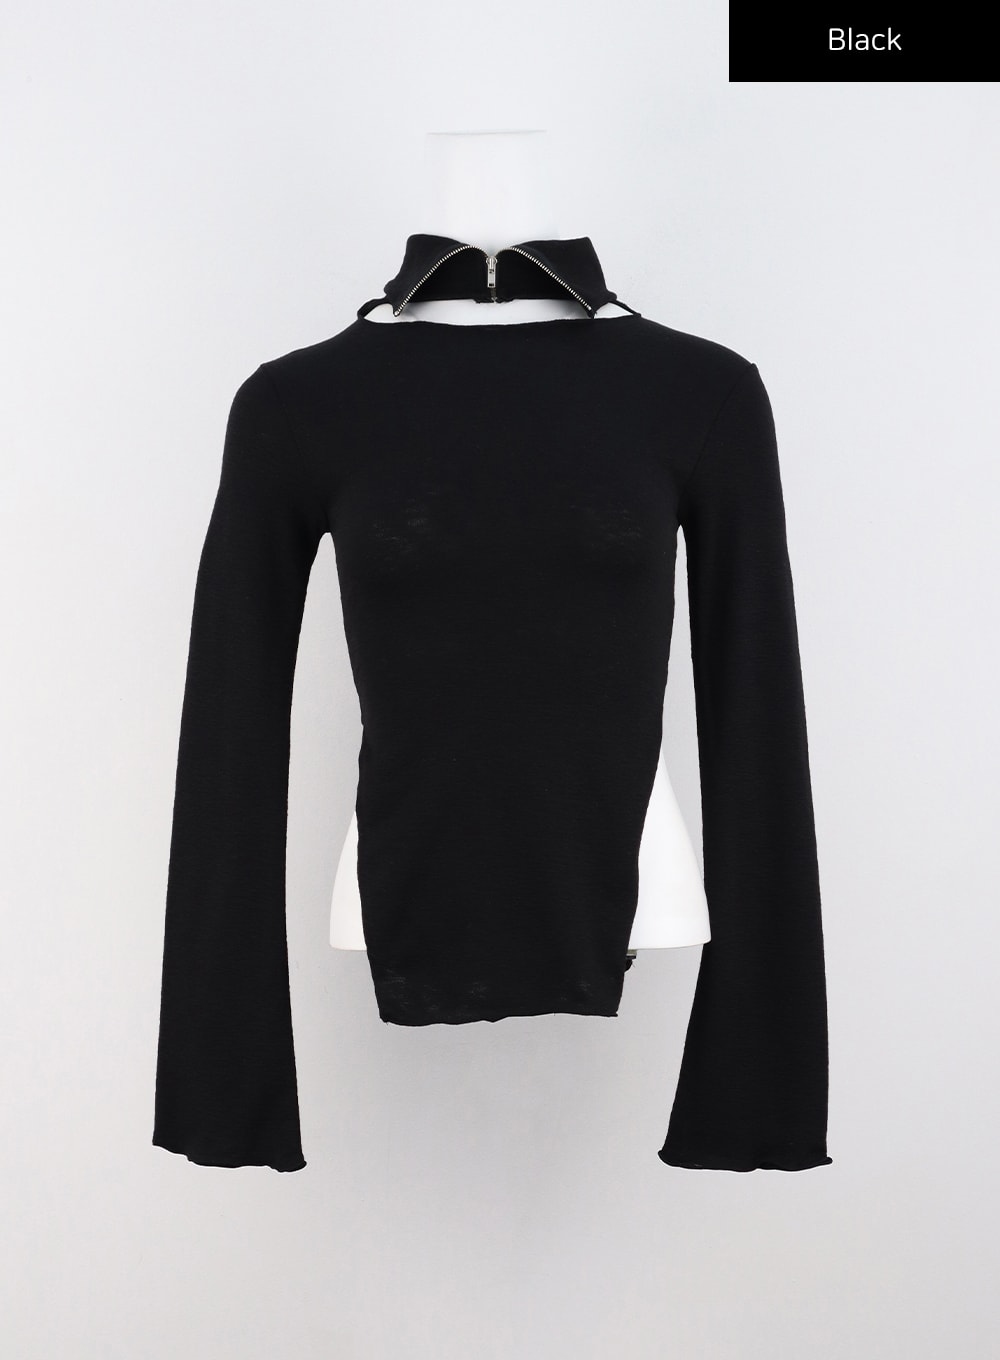 long-sleeve-top-with-high-neck-collar-co319 / Black